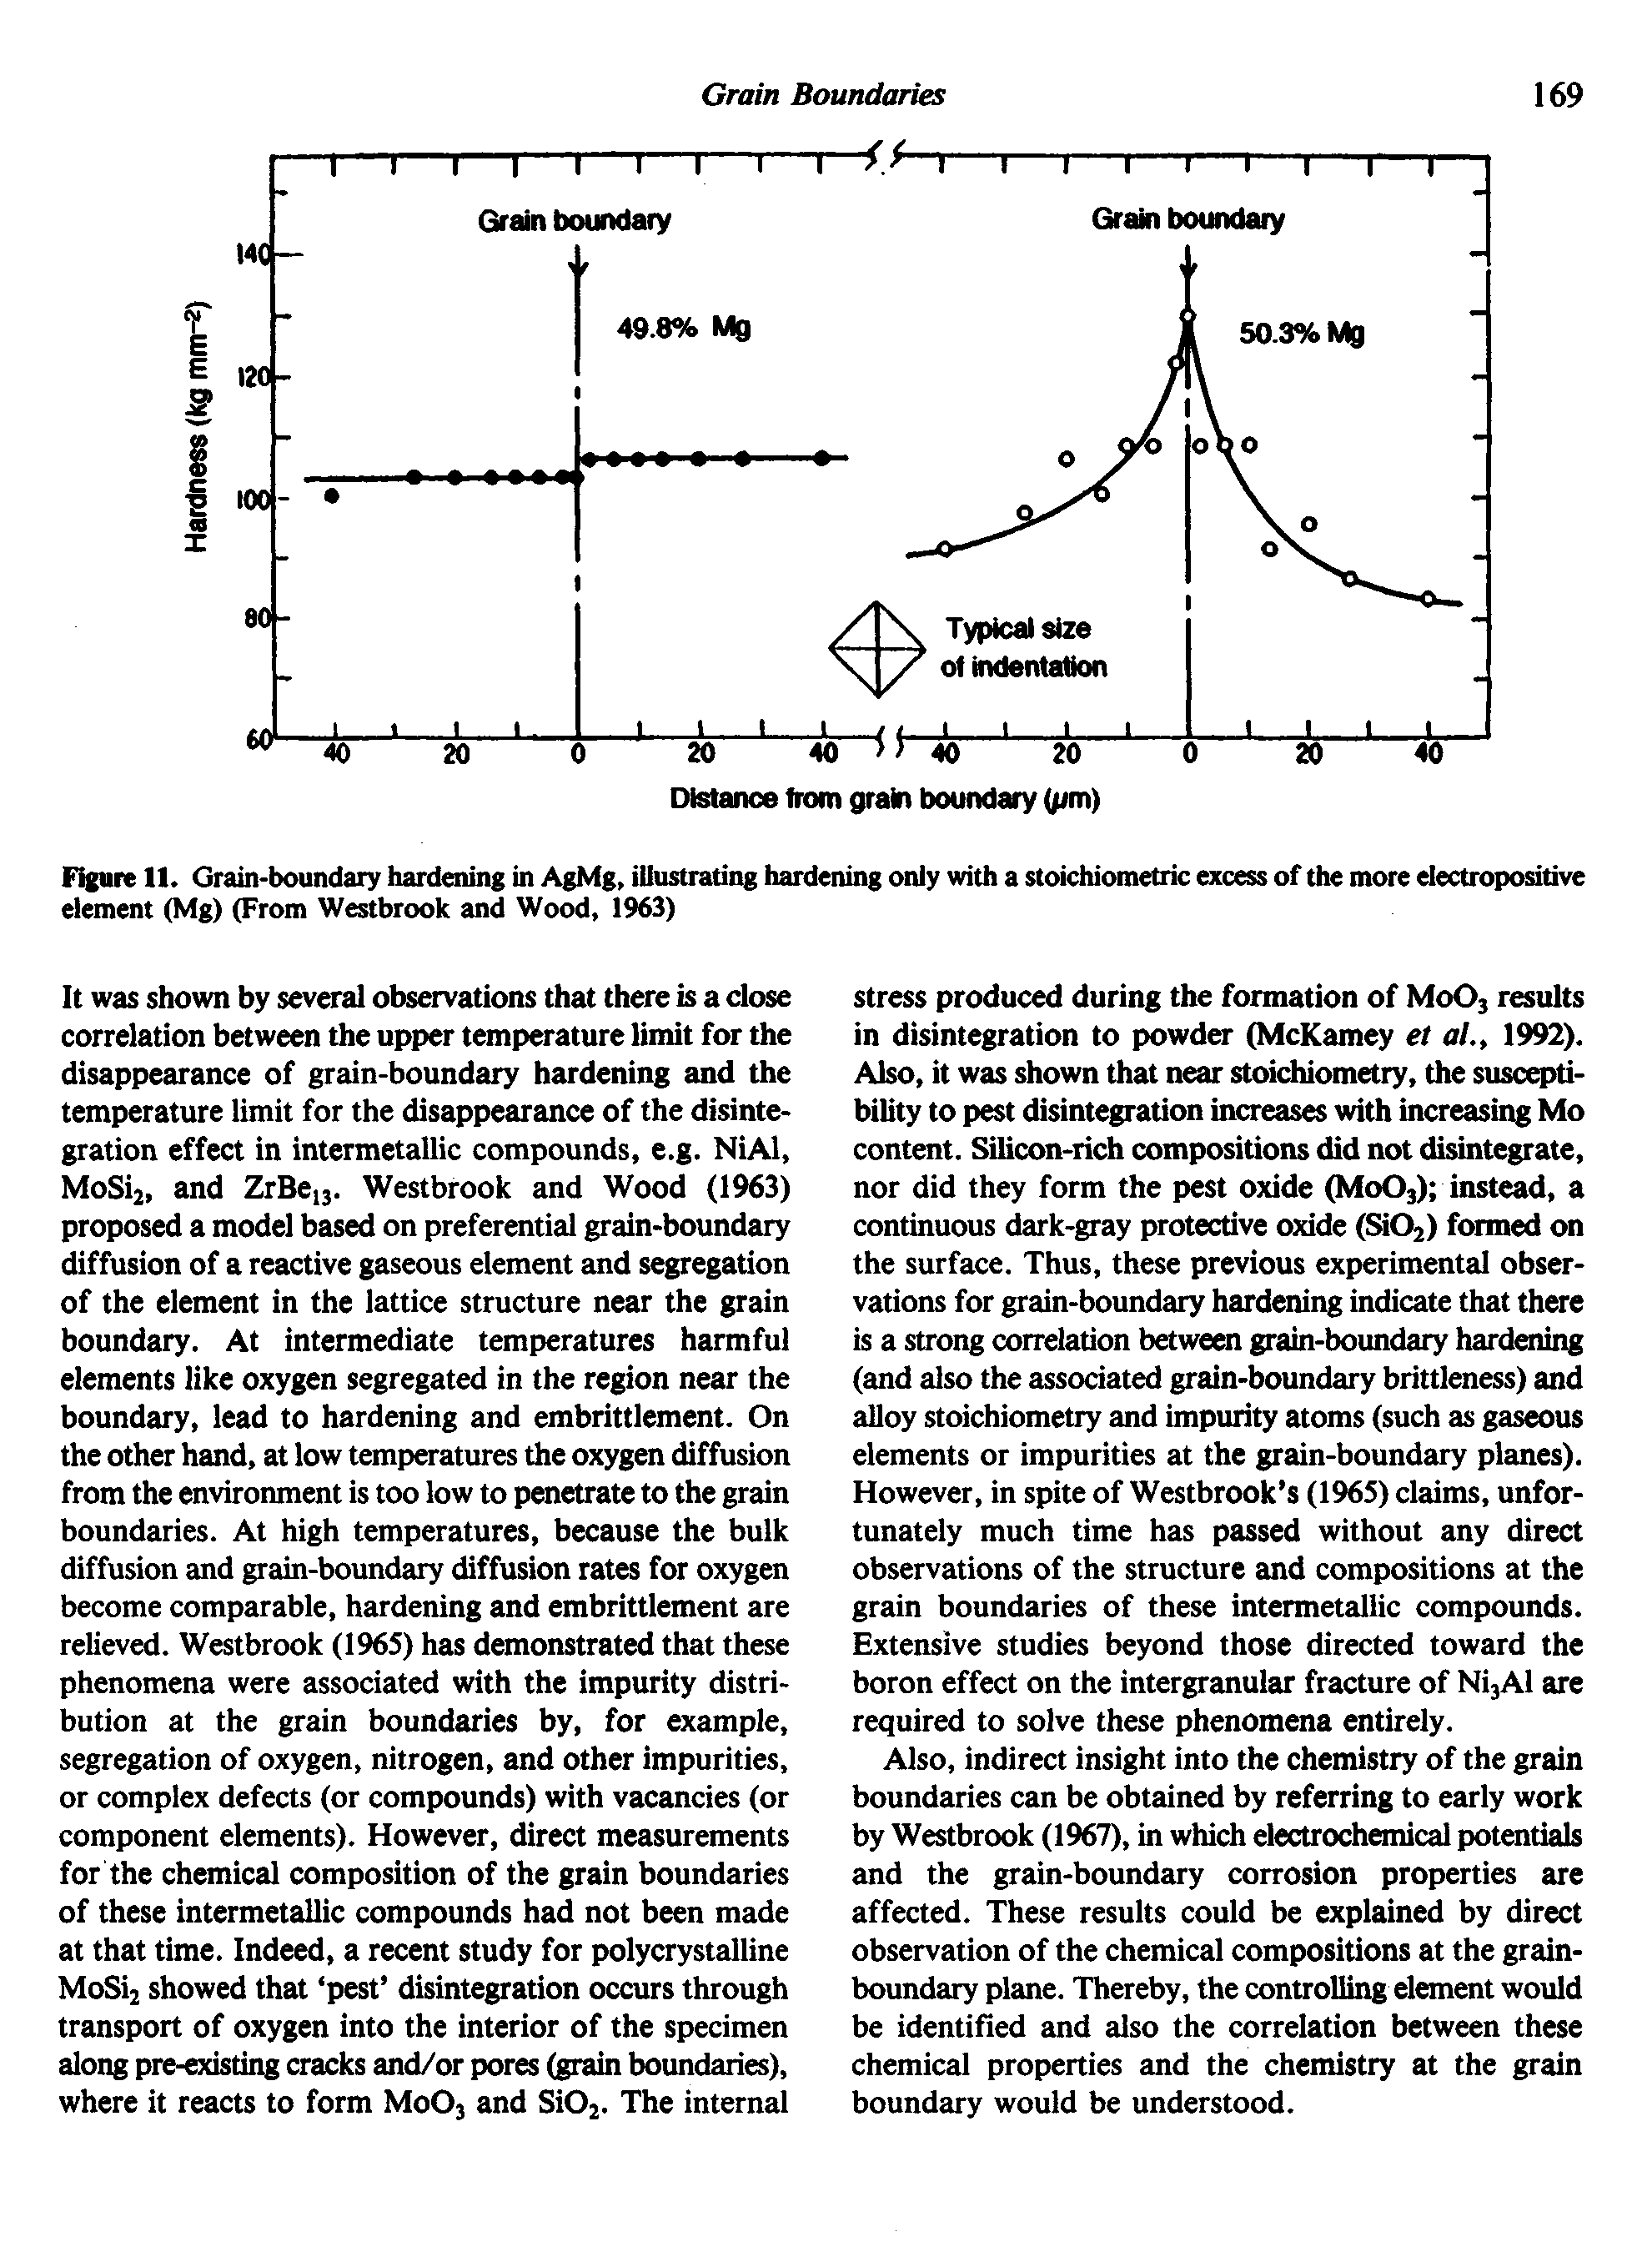 Figure 11. Grain-boundary hardening in AgMg, iUustrating hardening only with a stoichiometric excess of the more dectropositive element (Mg) (From Westbrook and Wood, 1%3)...